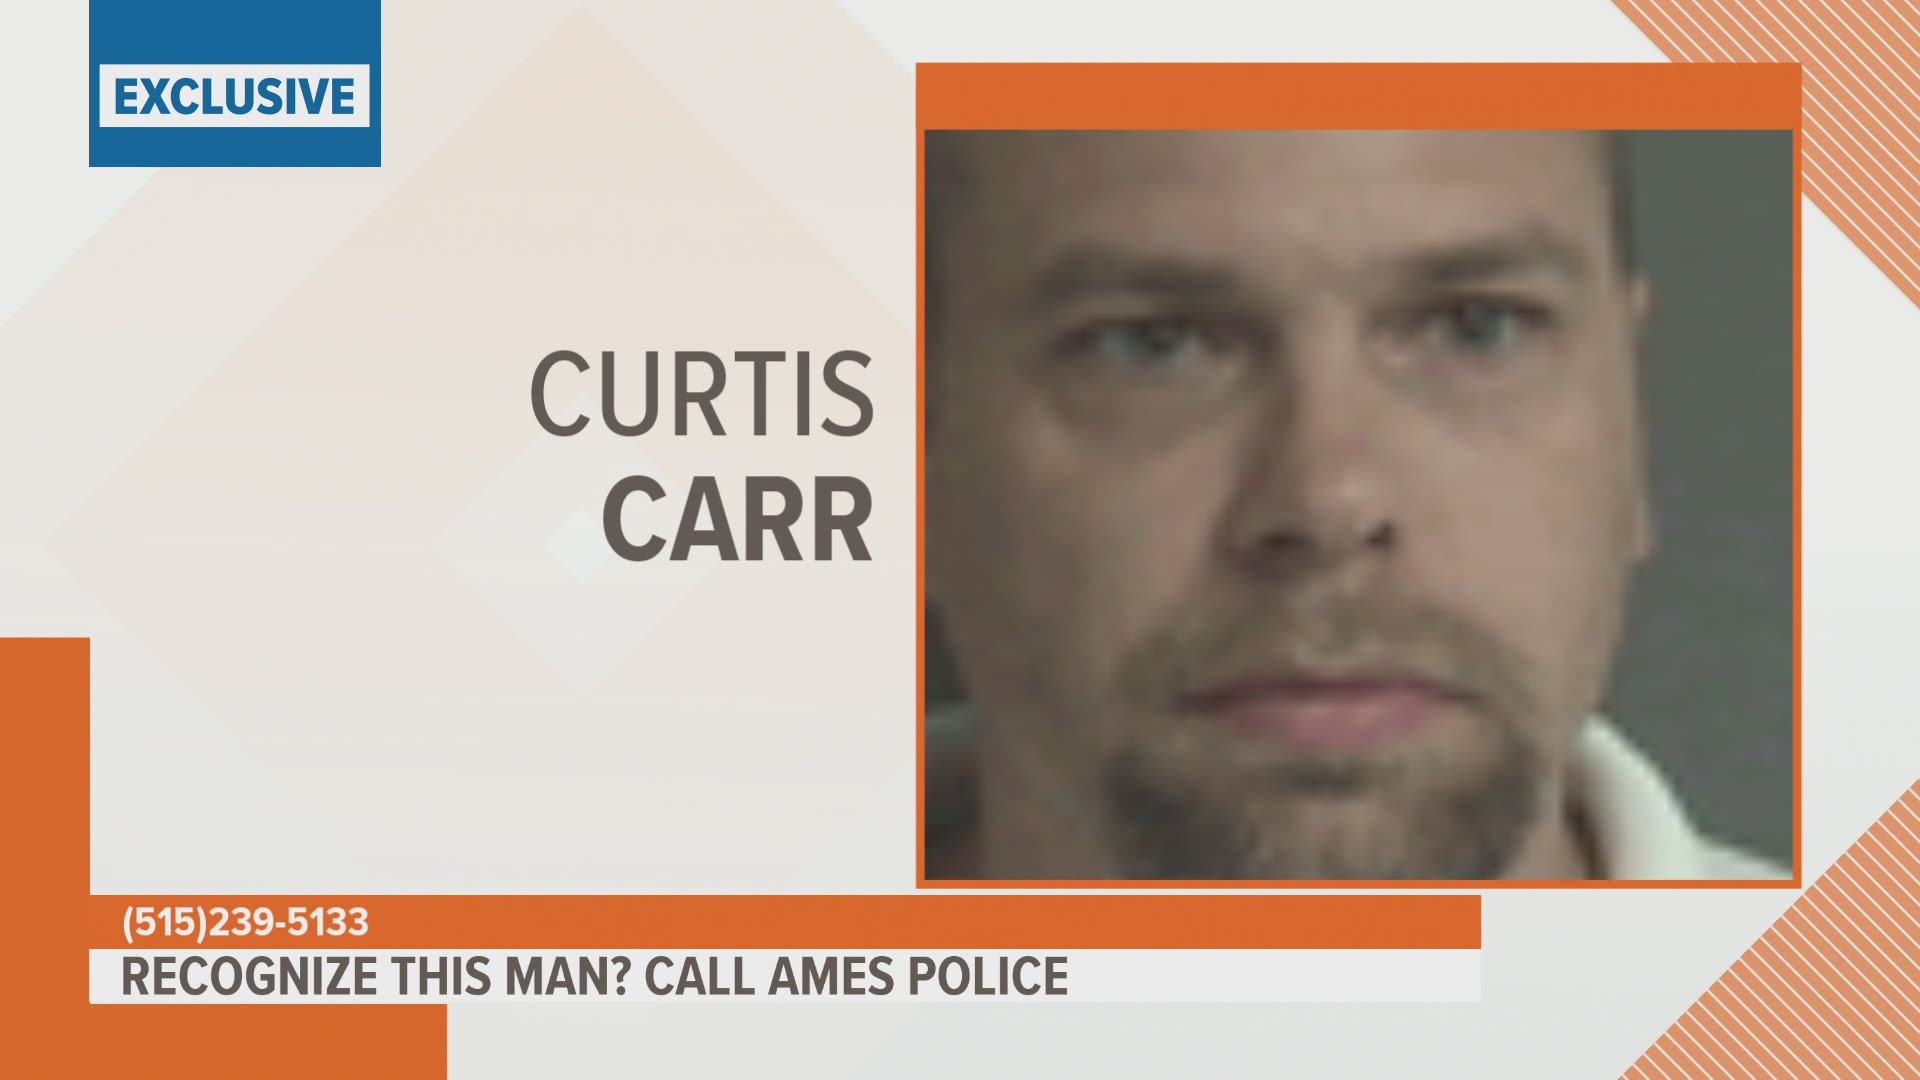 Curtis Carr, 47, is wanted by Ames police for a "string of burglaries" across Central Iowa.